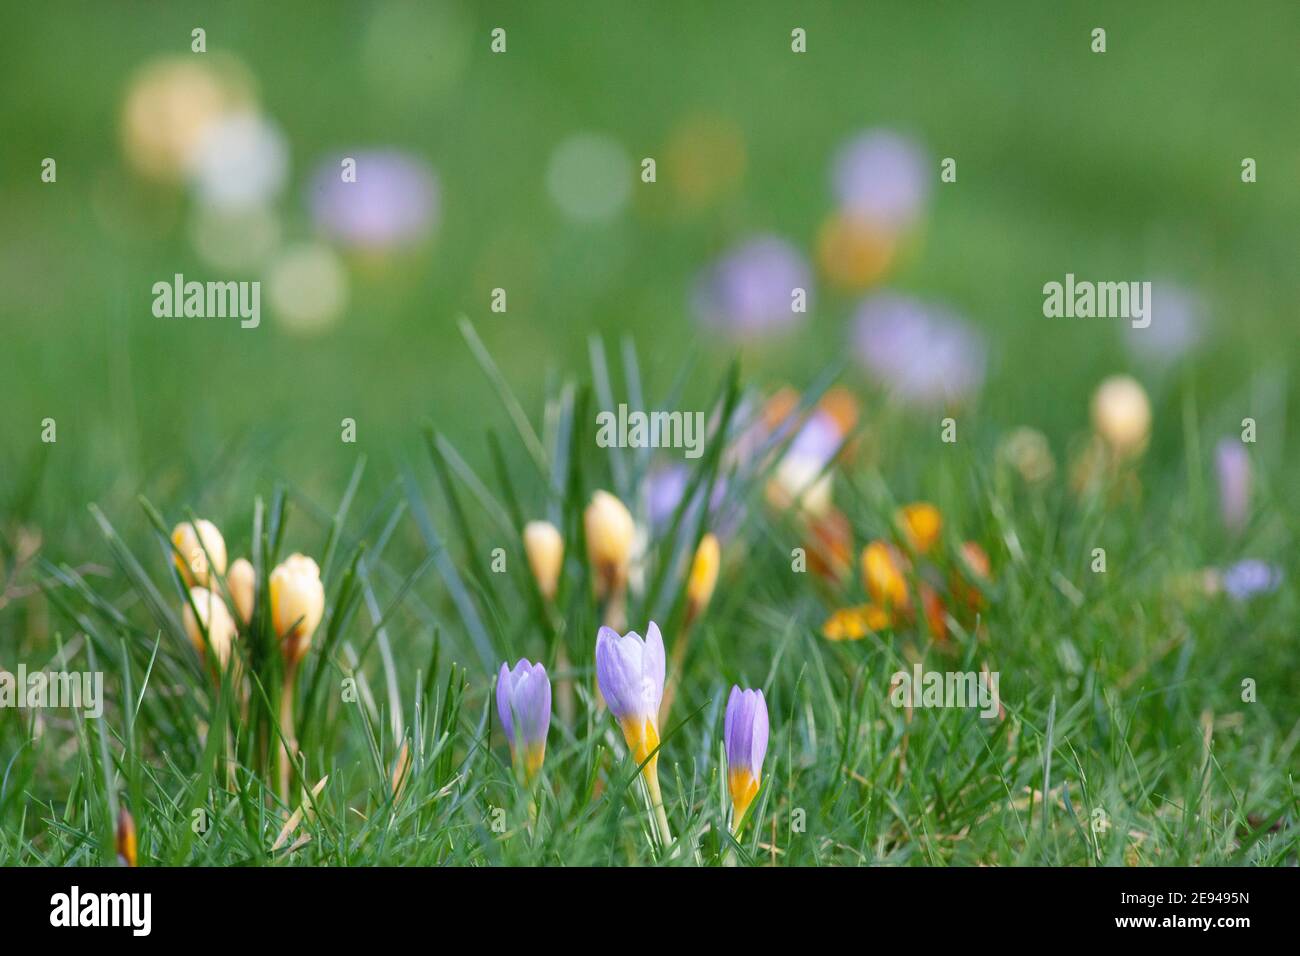 UK Weather, London, 2 February 2021: mild weather and sunshine in the south of England encourages crosuses into flower, even while snow is falling in the north of the UK. Anna Watson/Alamy Live News. Stock Photo